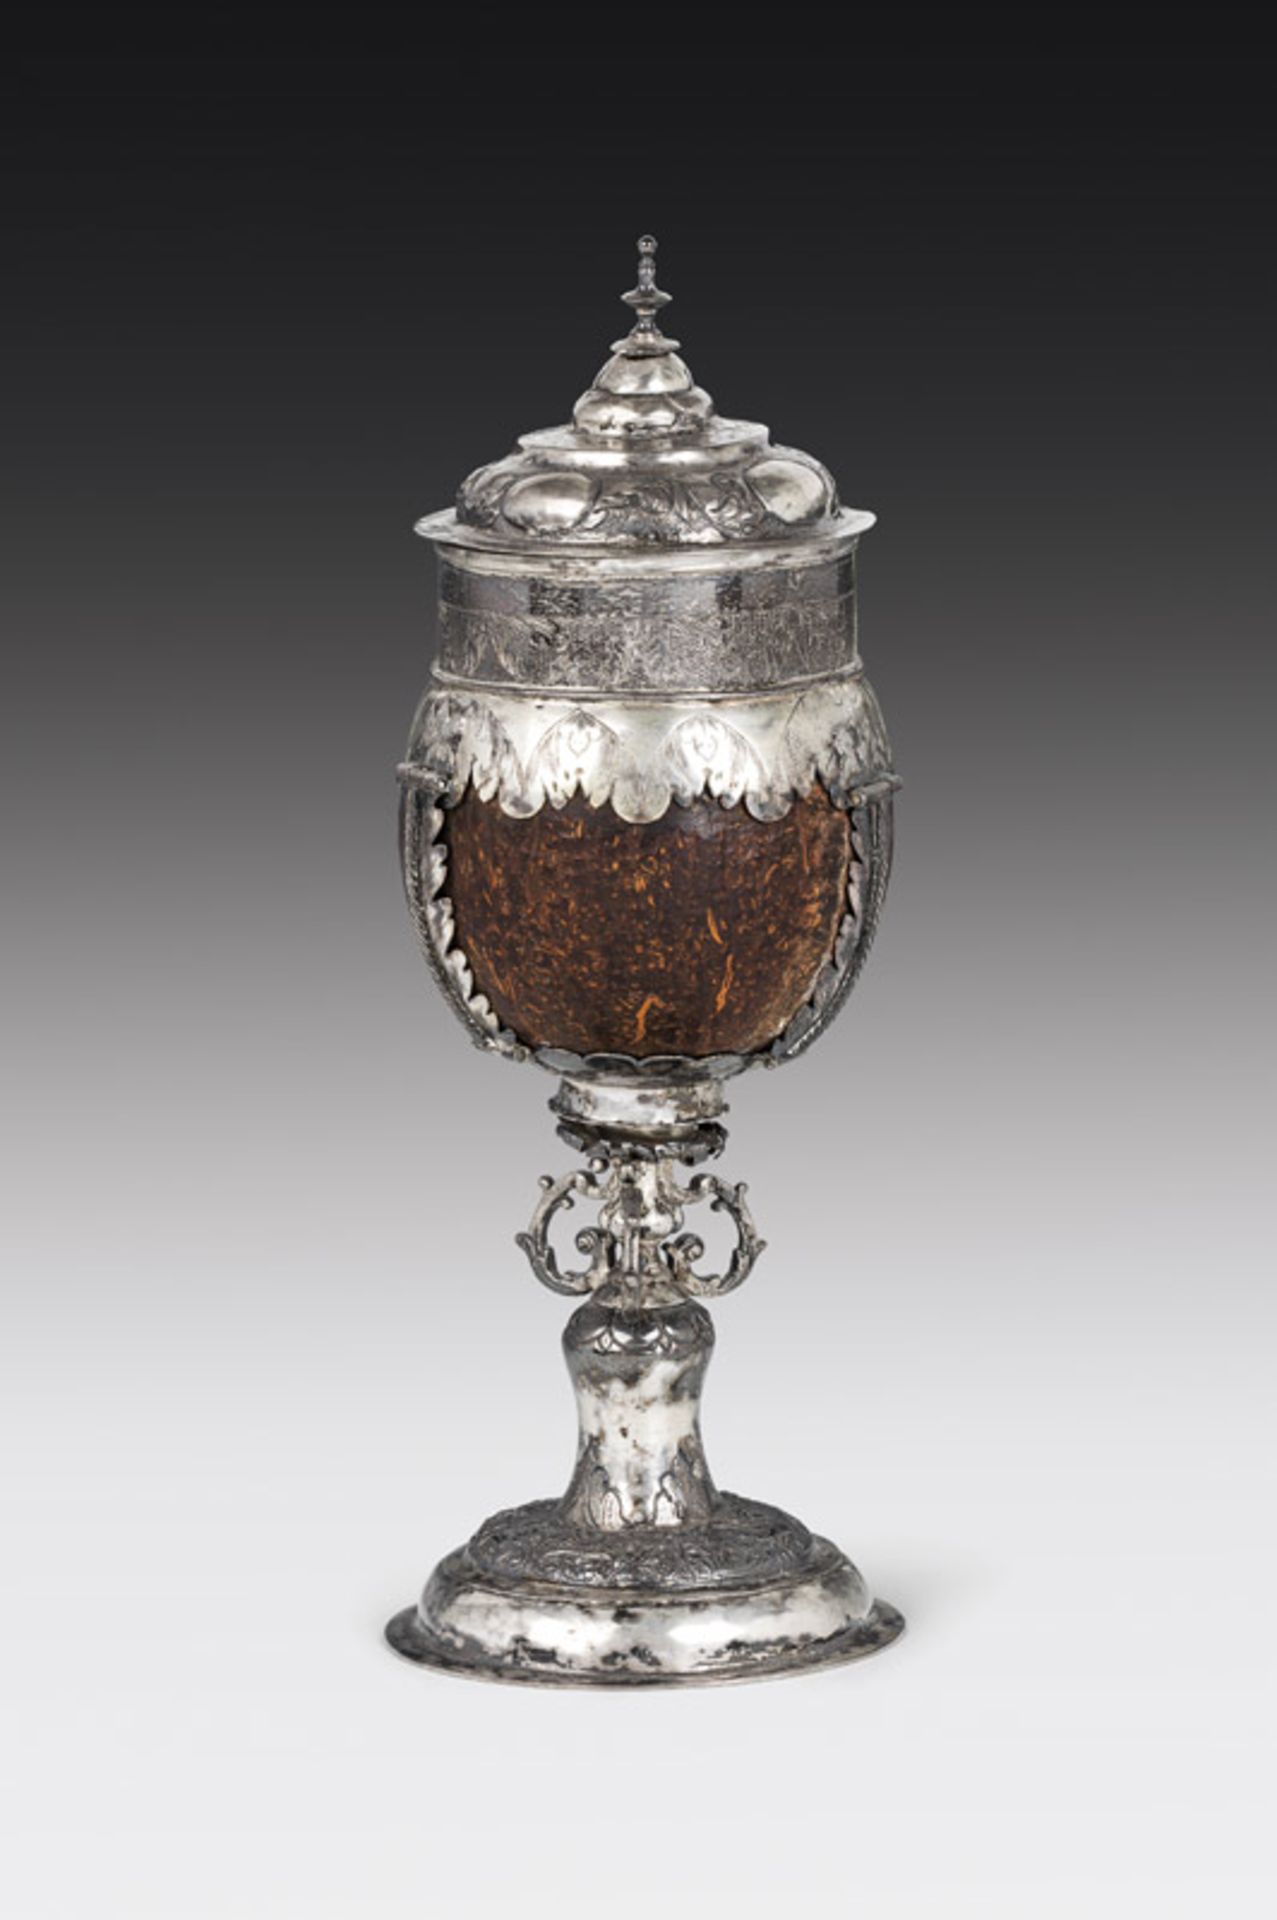 Coconut goblet, Germany, 17th century